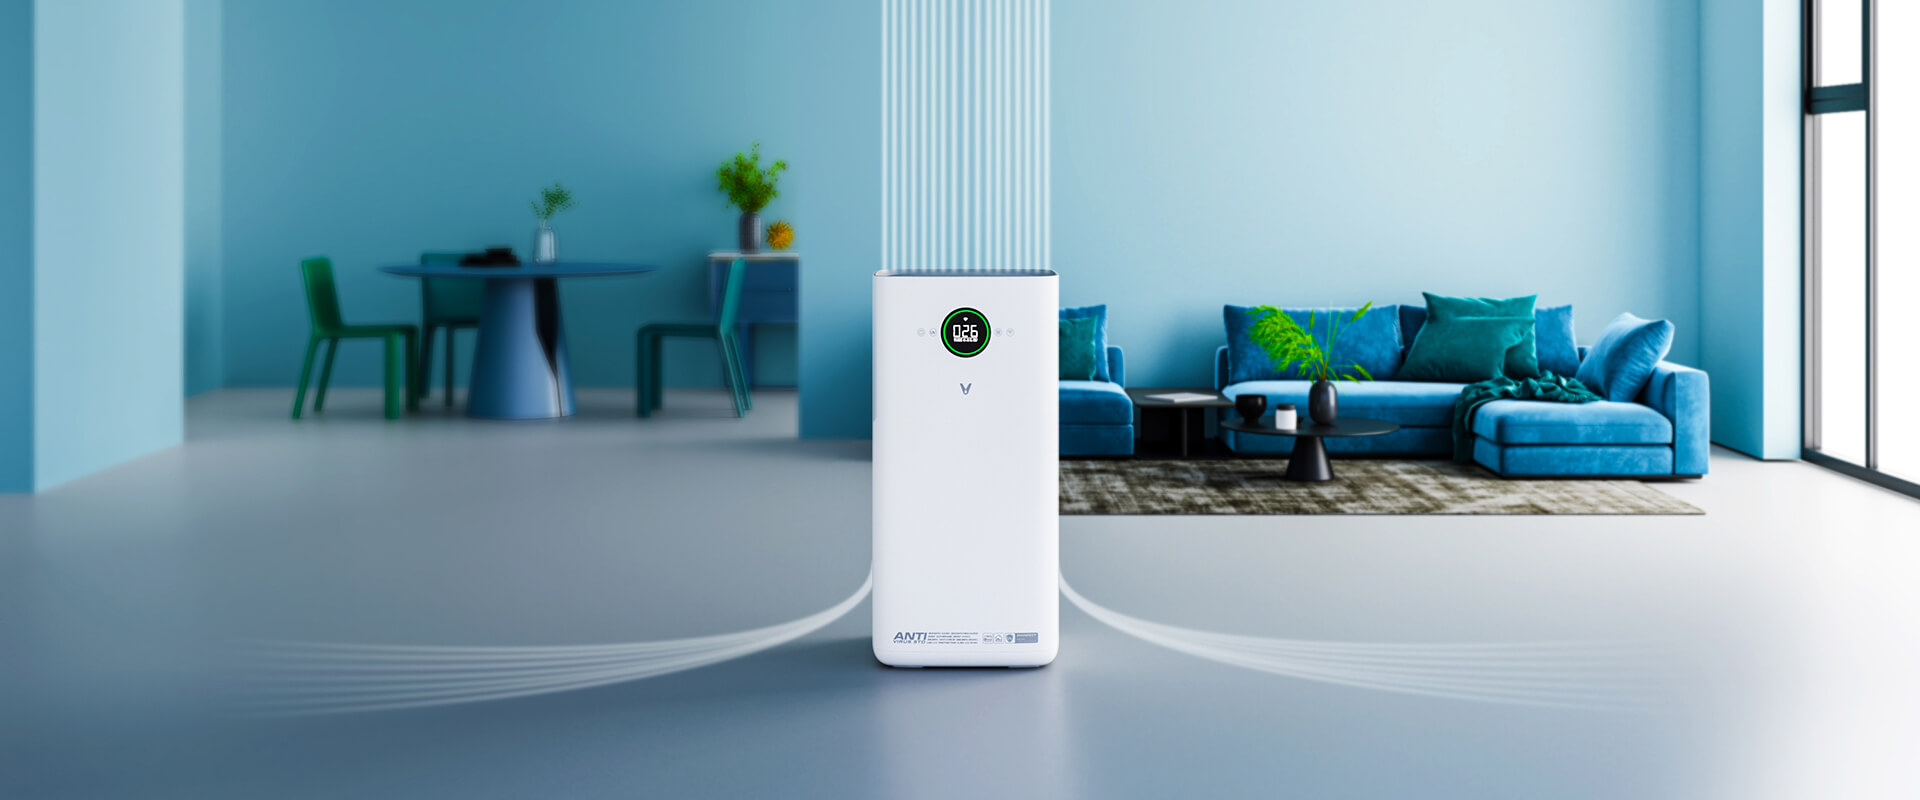 family care air purifier